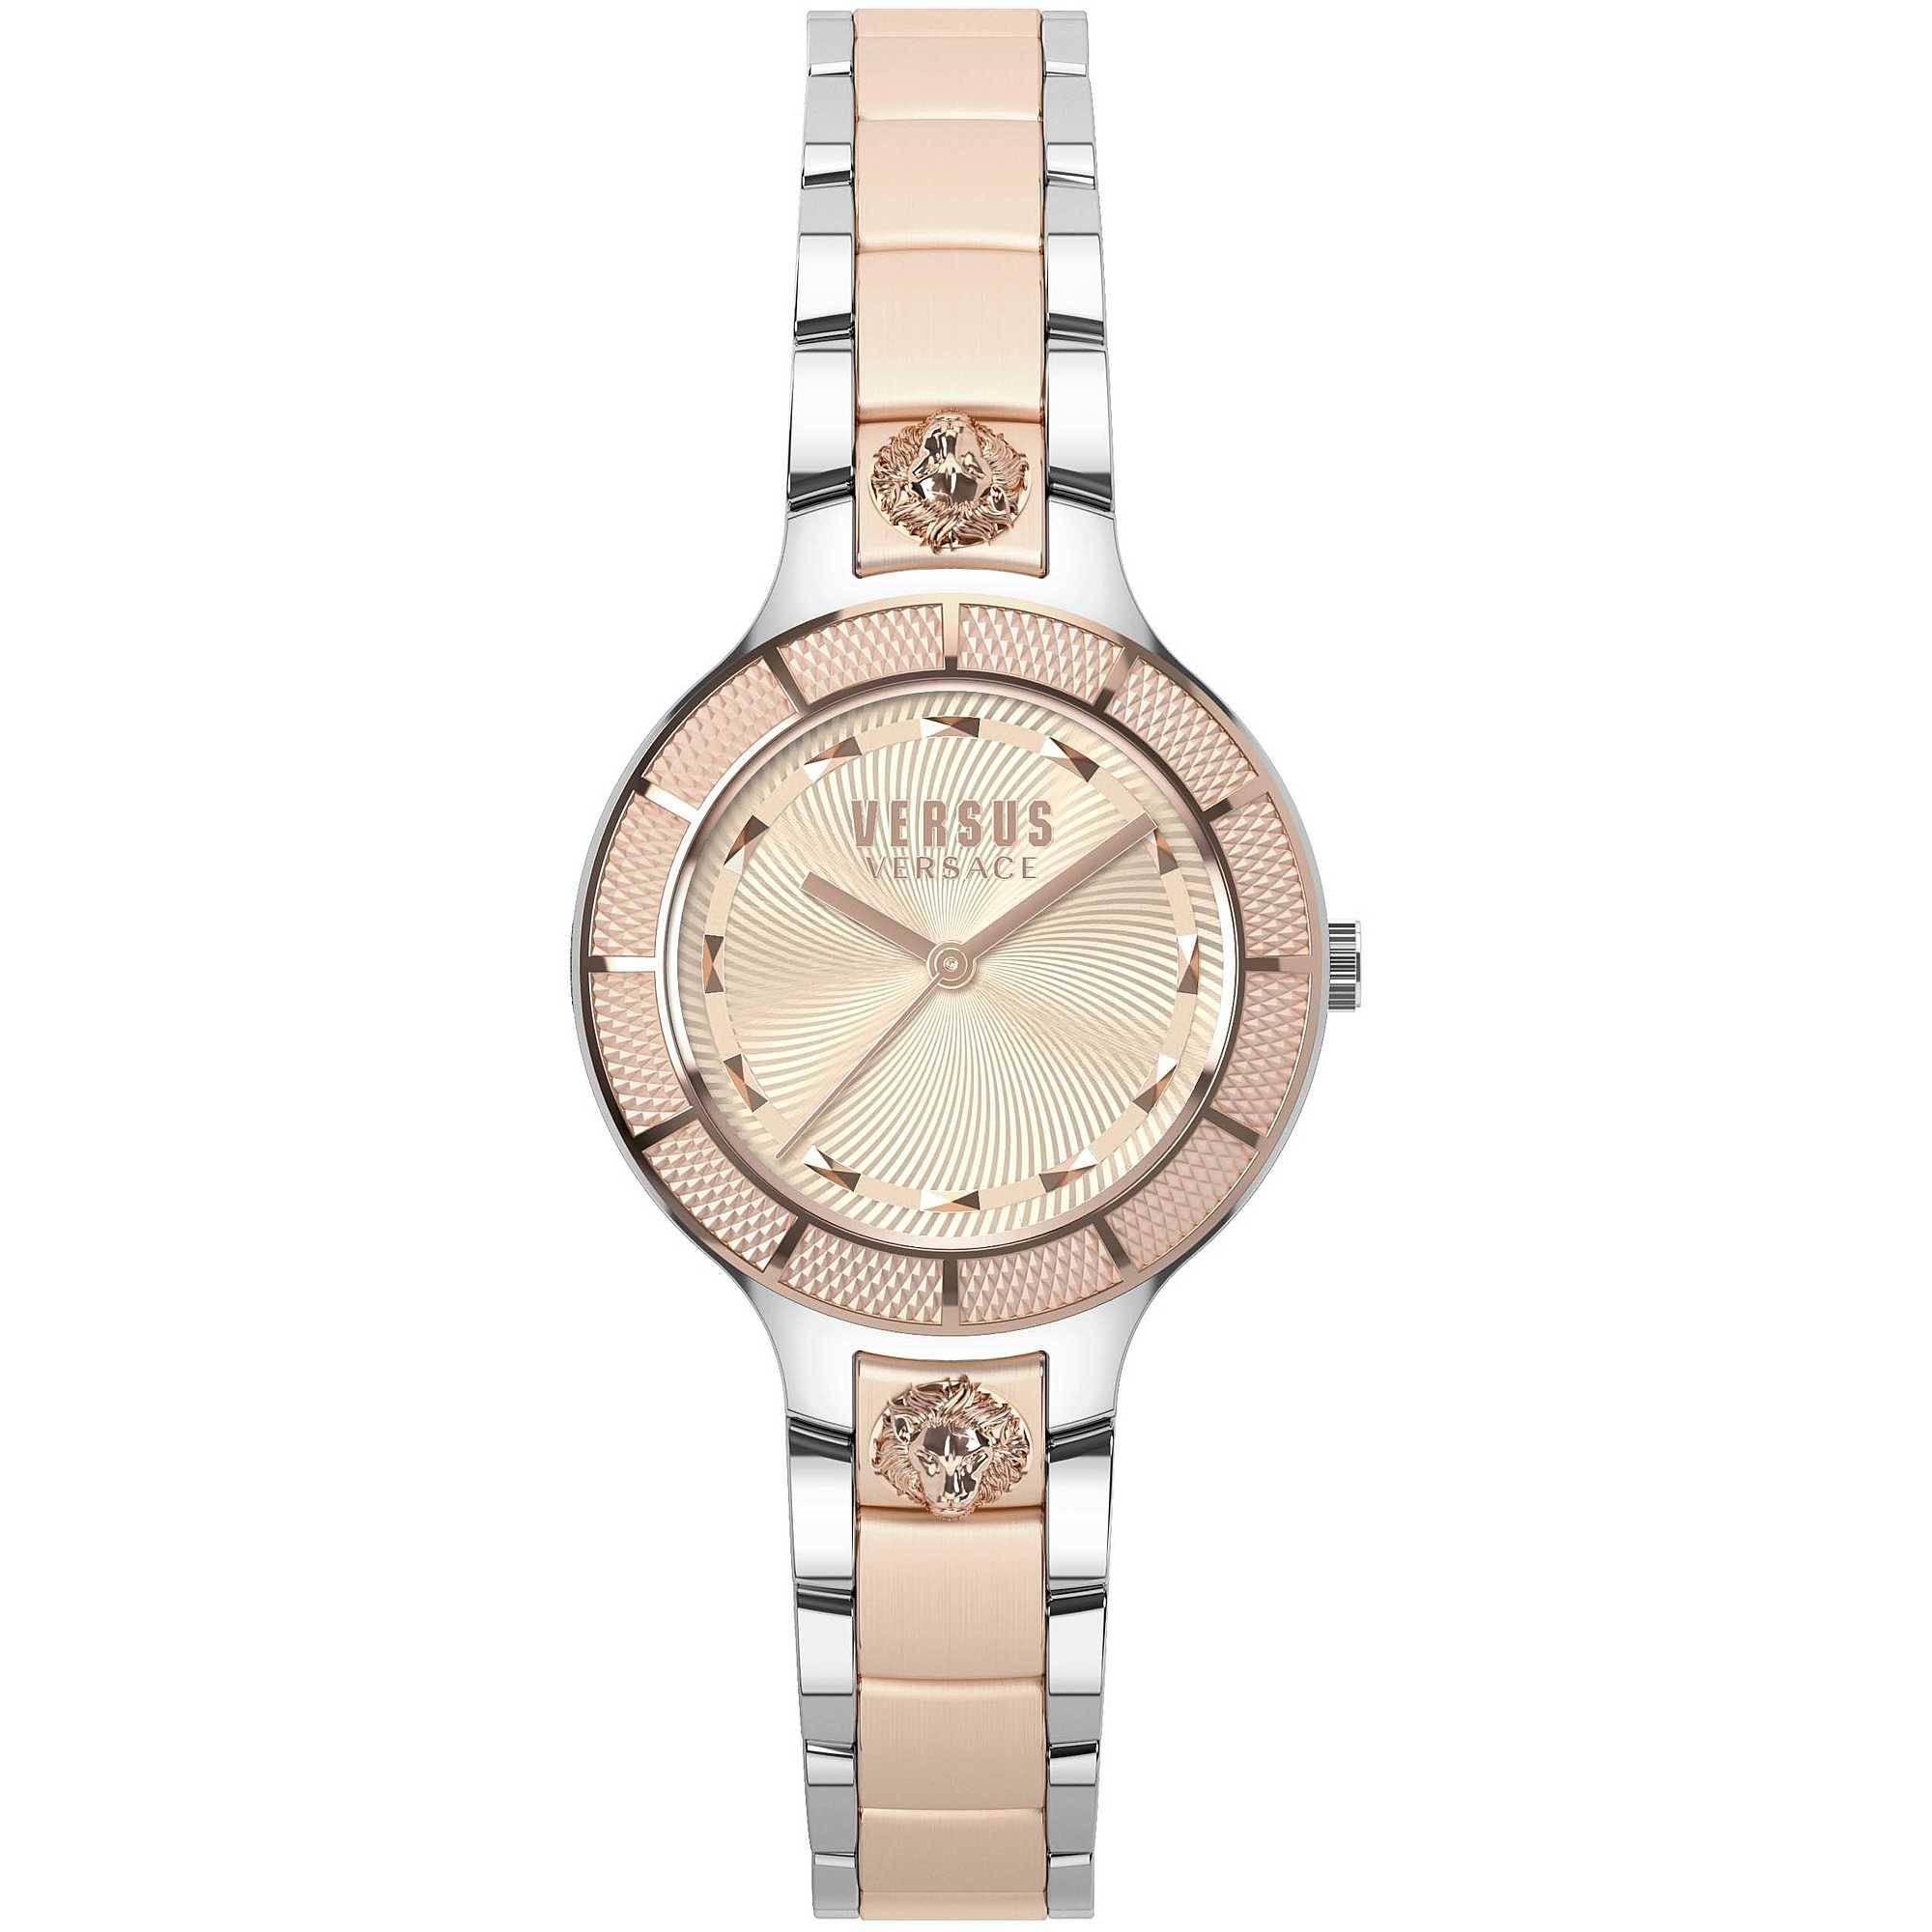 Versus silver and rose gold tone steel watch